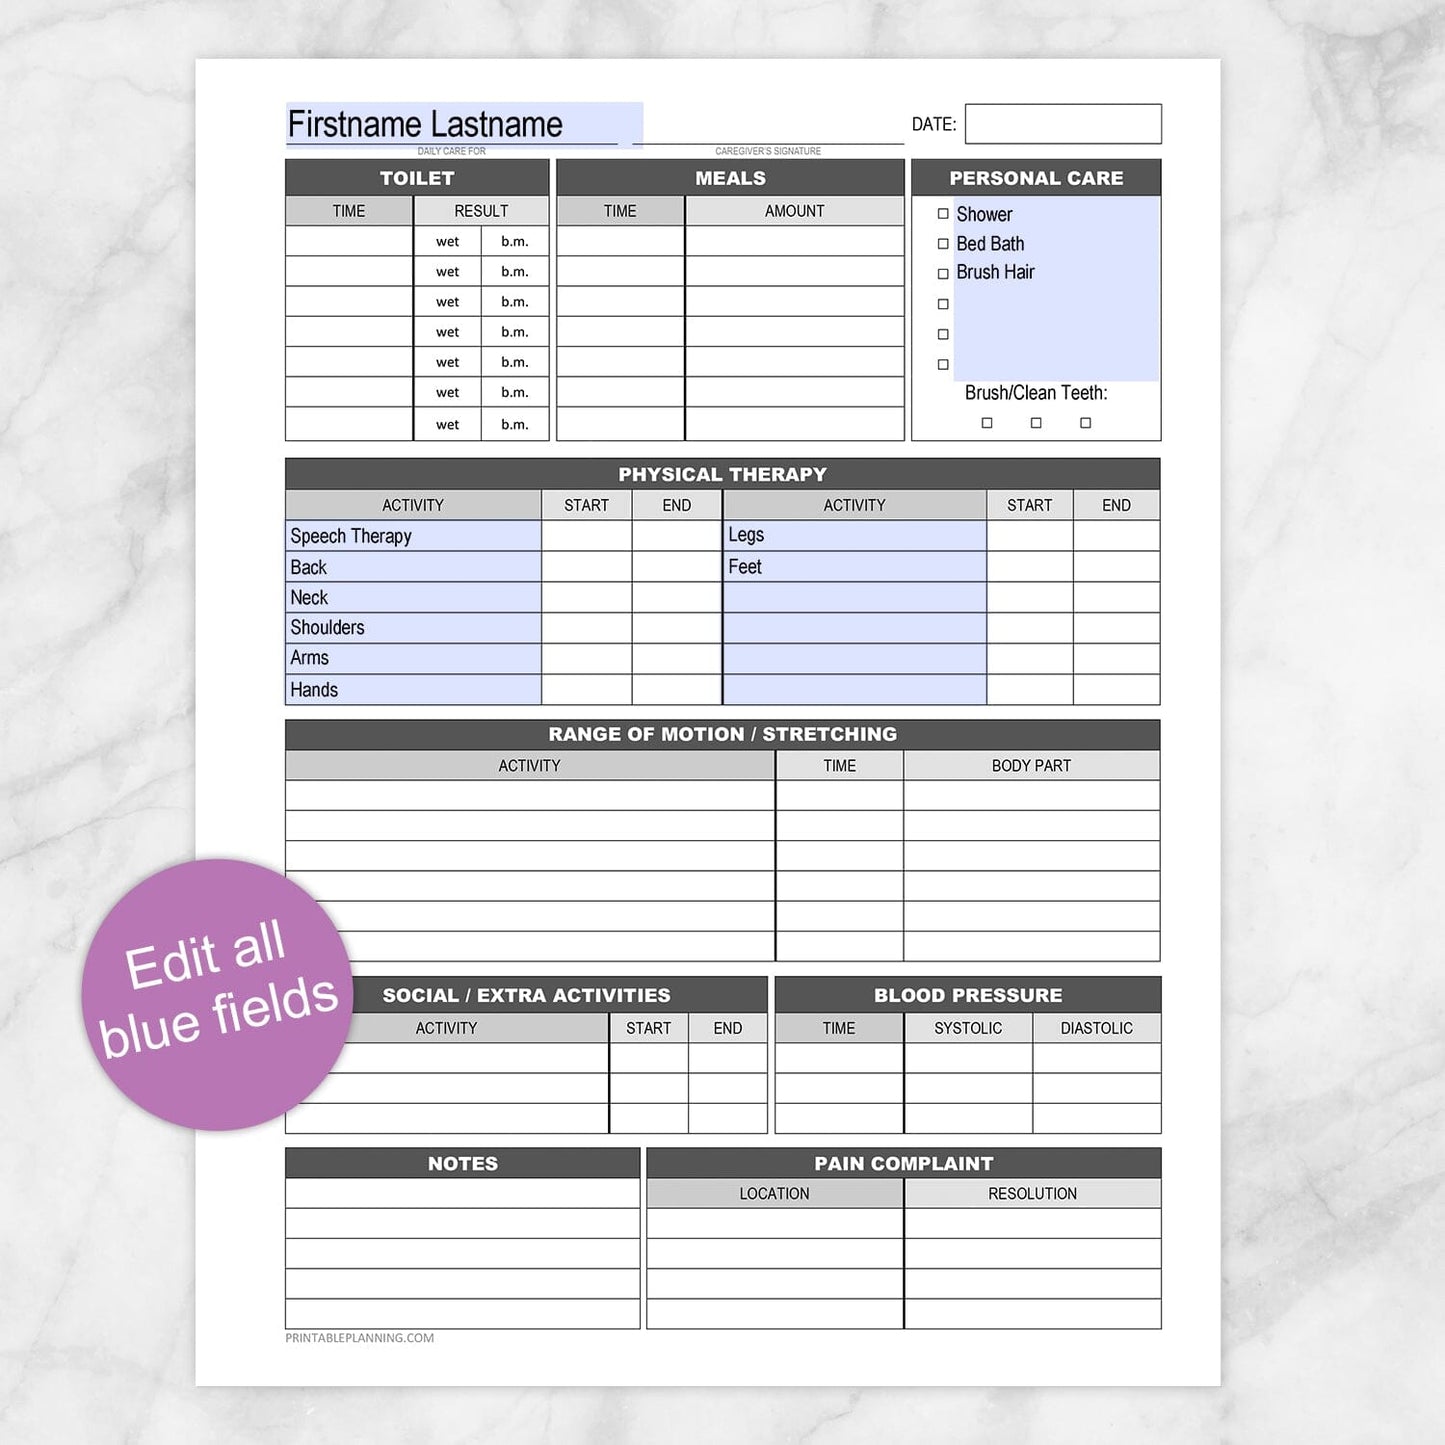 Printable Disability with Physical Therapy Daily Care Sheet at Printable Planning. Edit all blue fields.